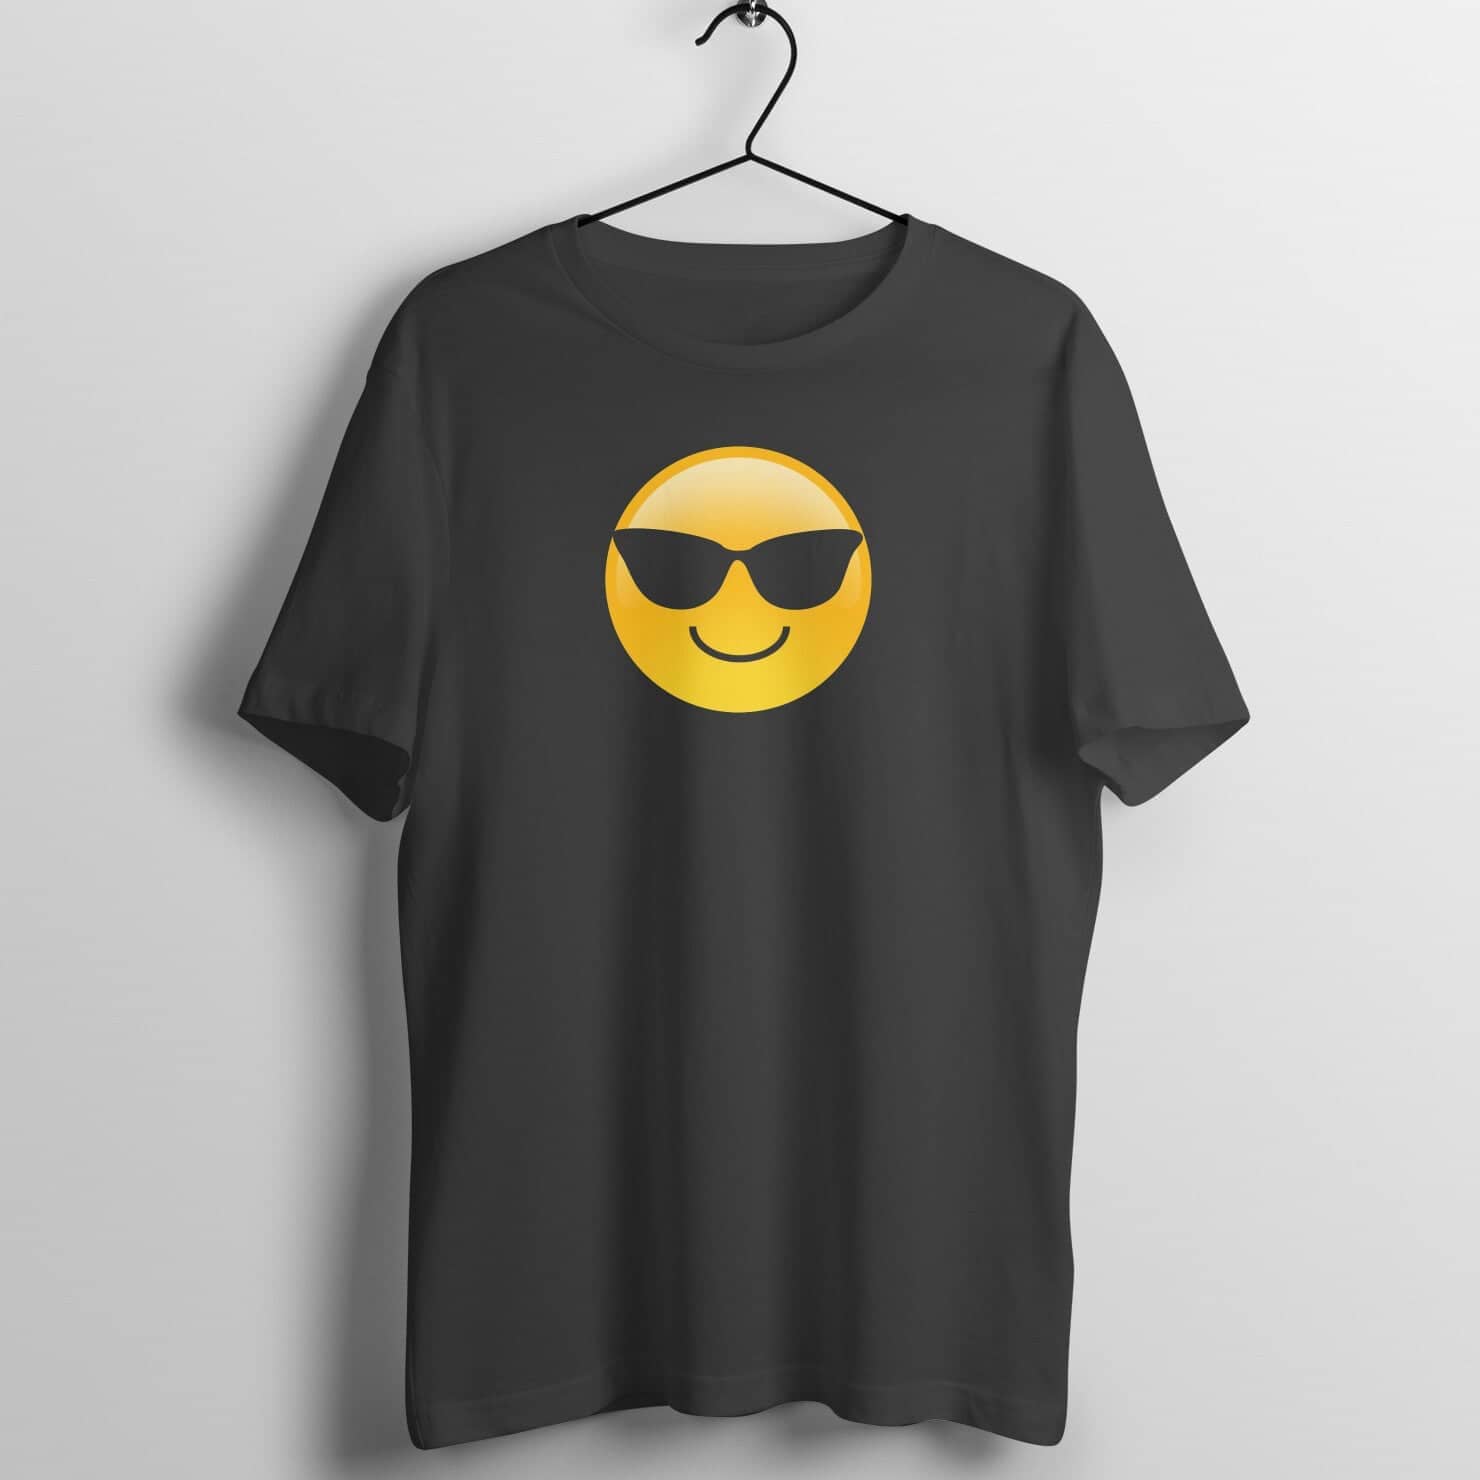 I am Cool Whatever Exclusive Emoji T Shirt for Men and Women Printrove Black S 